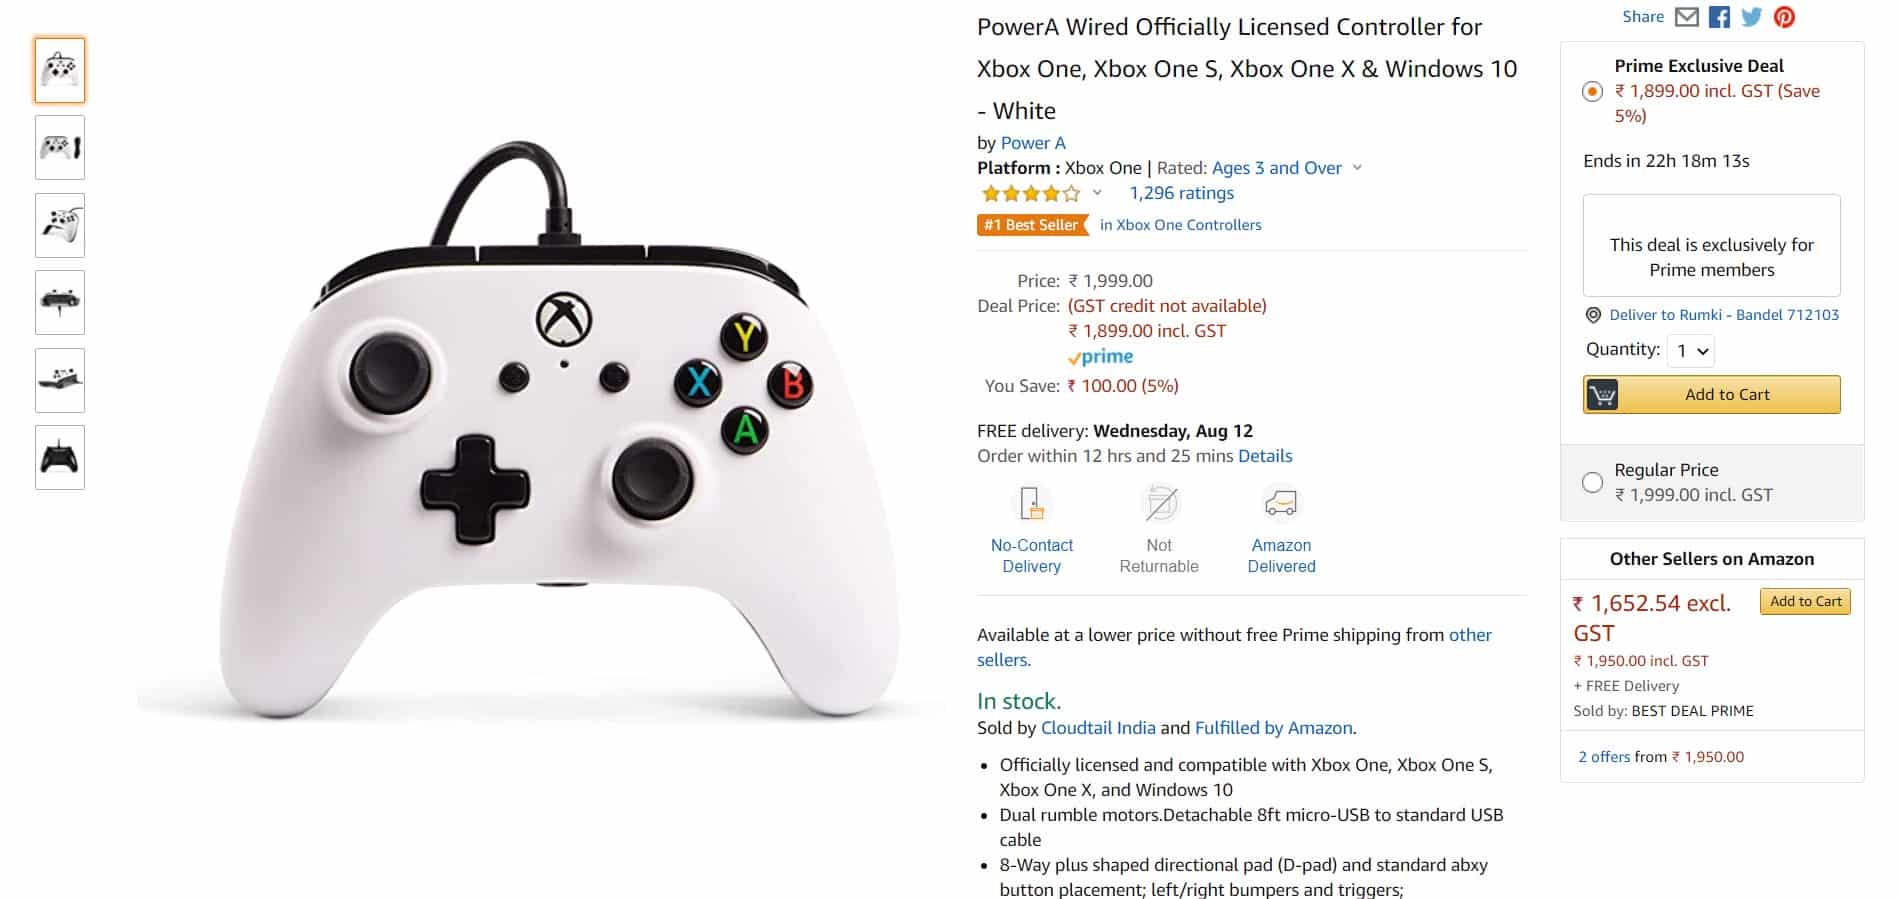 power a Power A bestselling gamepad controllers on Amazon Prime Day